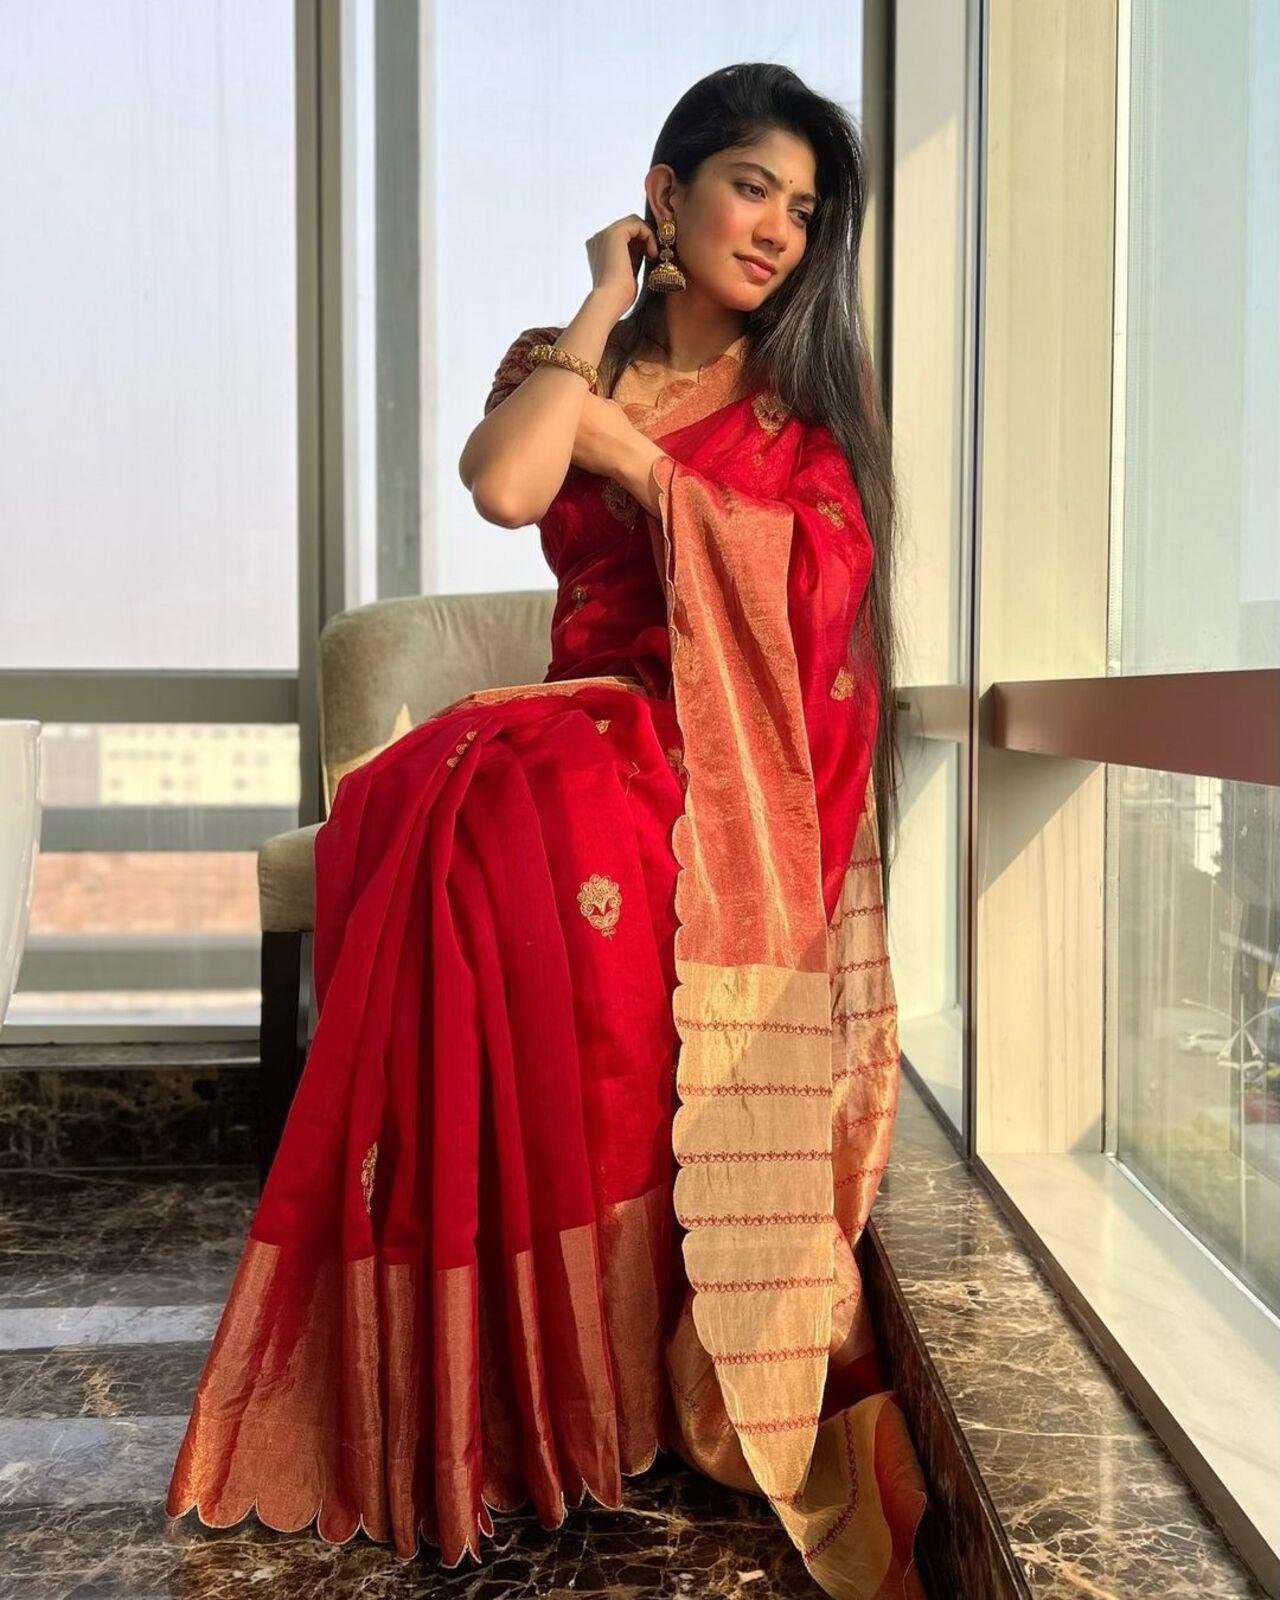 The colour red is a safe bet for any festive occasion in India. Sai exudes elegance in this silk saree and paired it with traditional jewellery